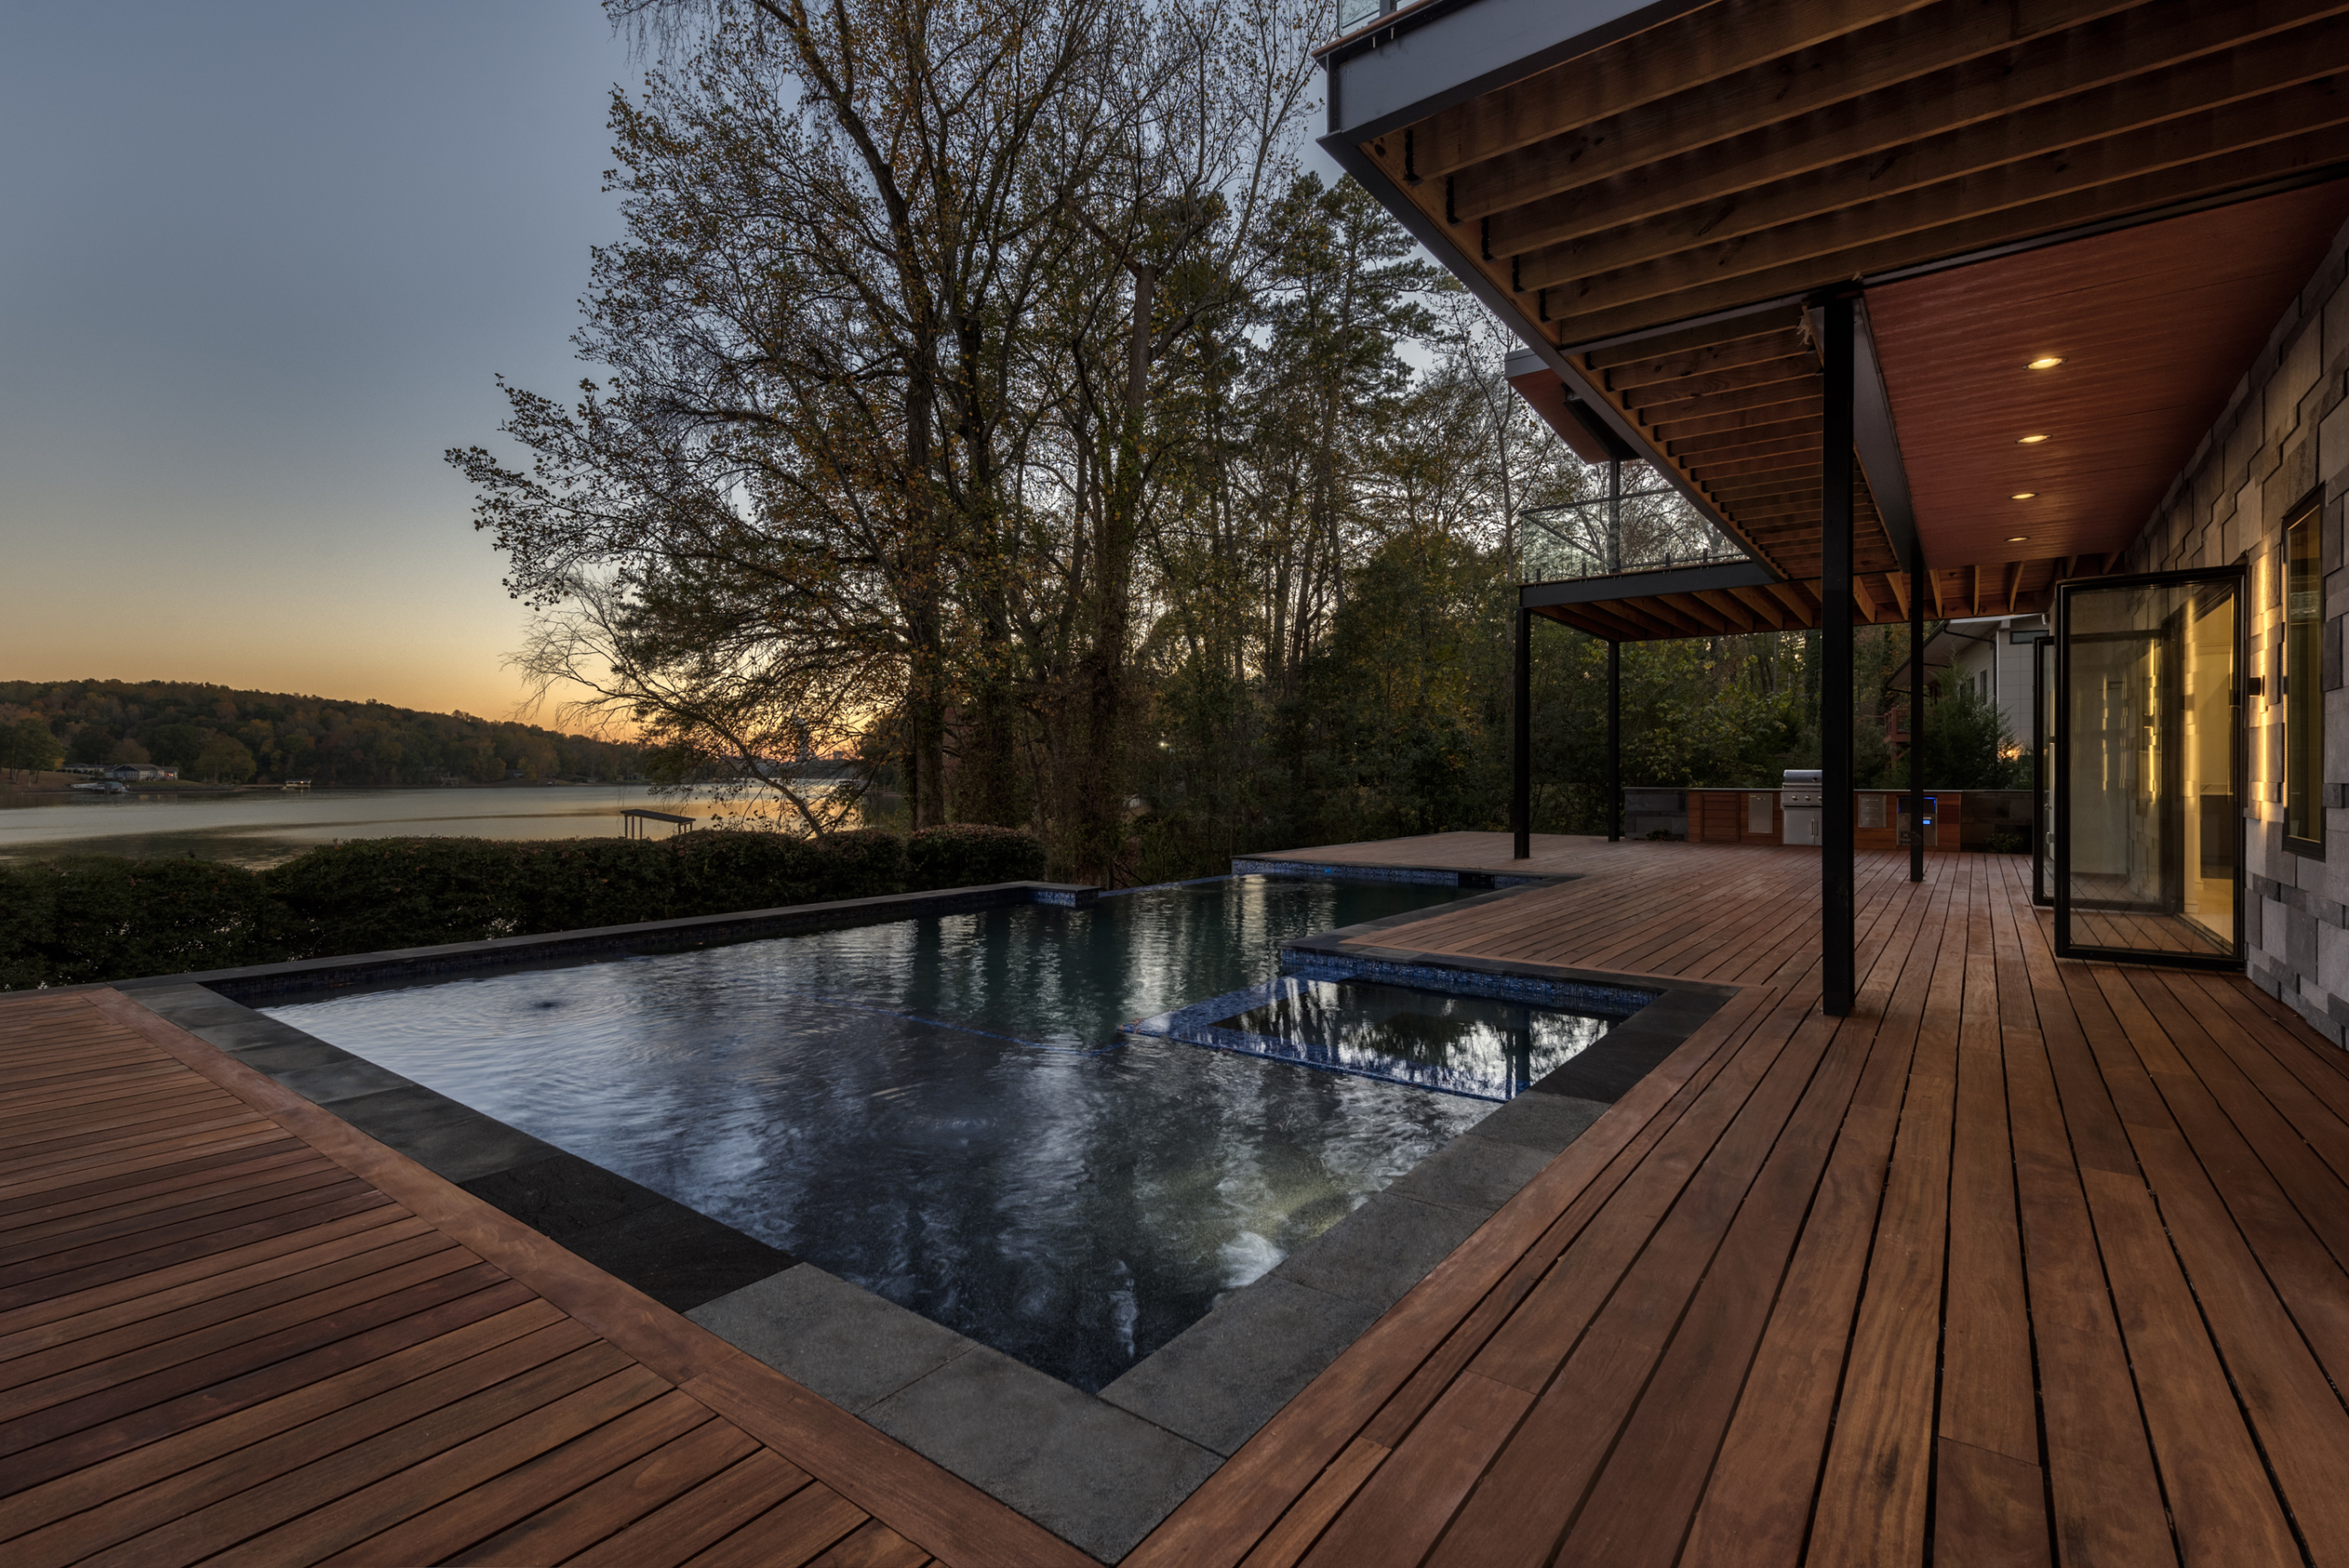 Imported, custom-cut-pattern, lava stone from Bali, Indonesia on exterior and interior walls and around pool area, Imported exotic cumaru decking and wall details from Colombia, South America. Cumaru is extremely hard and durable and known for its beautiful bright red and orange hues